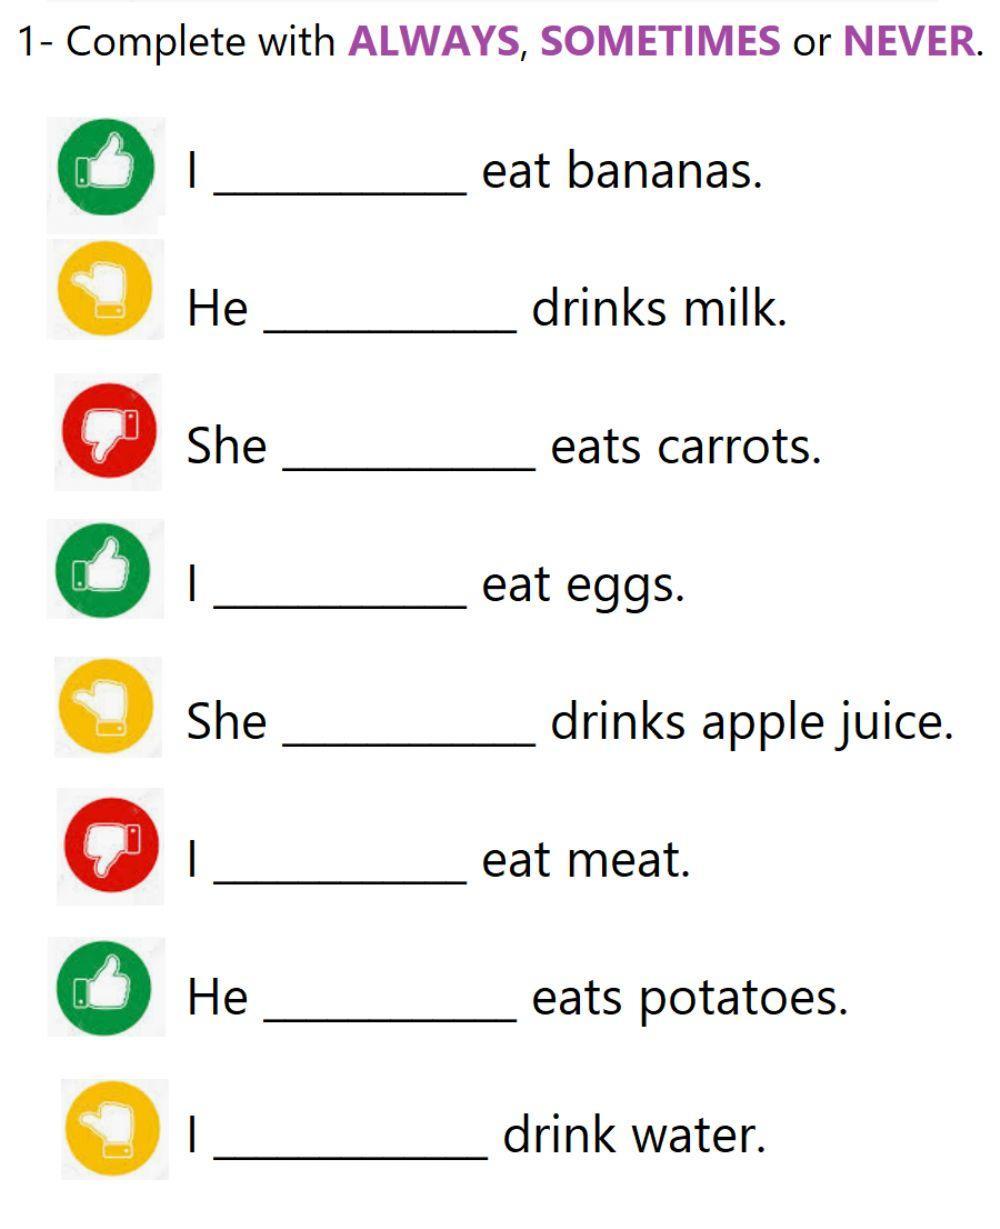 Frequency adverbs-Food